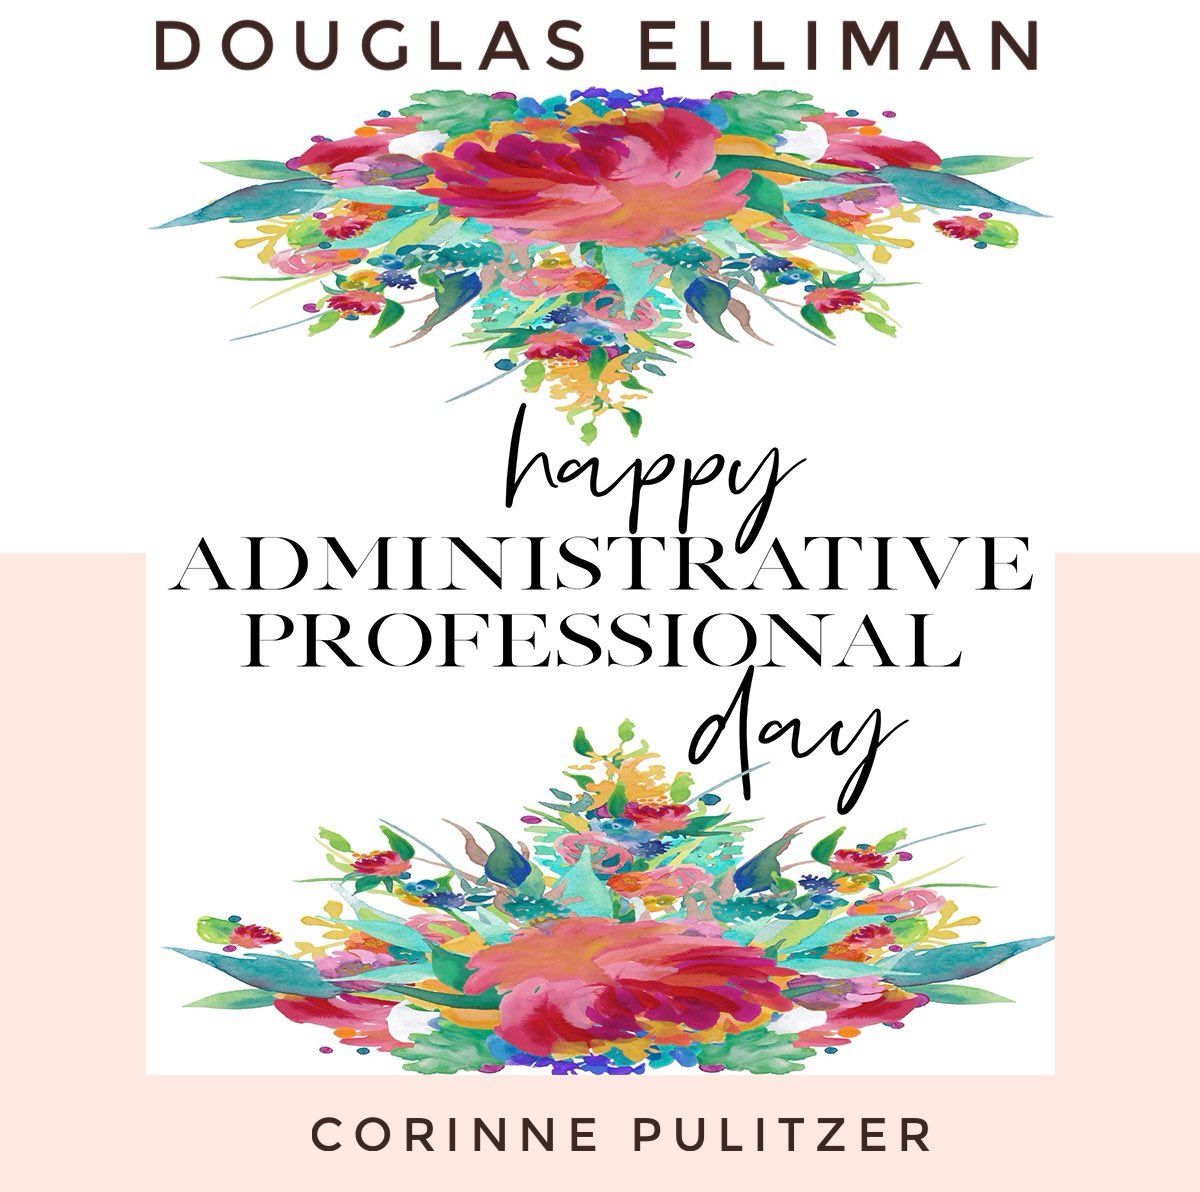 Today is #NationalAdministrativeProfessionalsDay! Please join me in saying “Thank You” to all who do so much to make it happen for each of us today & every day! @DouglasElliman  #AdminProfessionalsDay #AdminDay2024